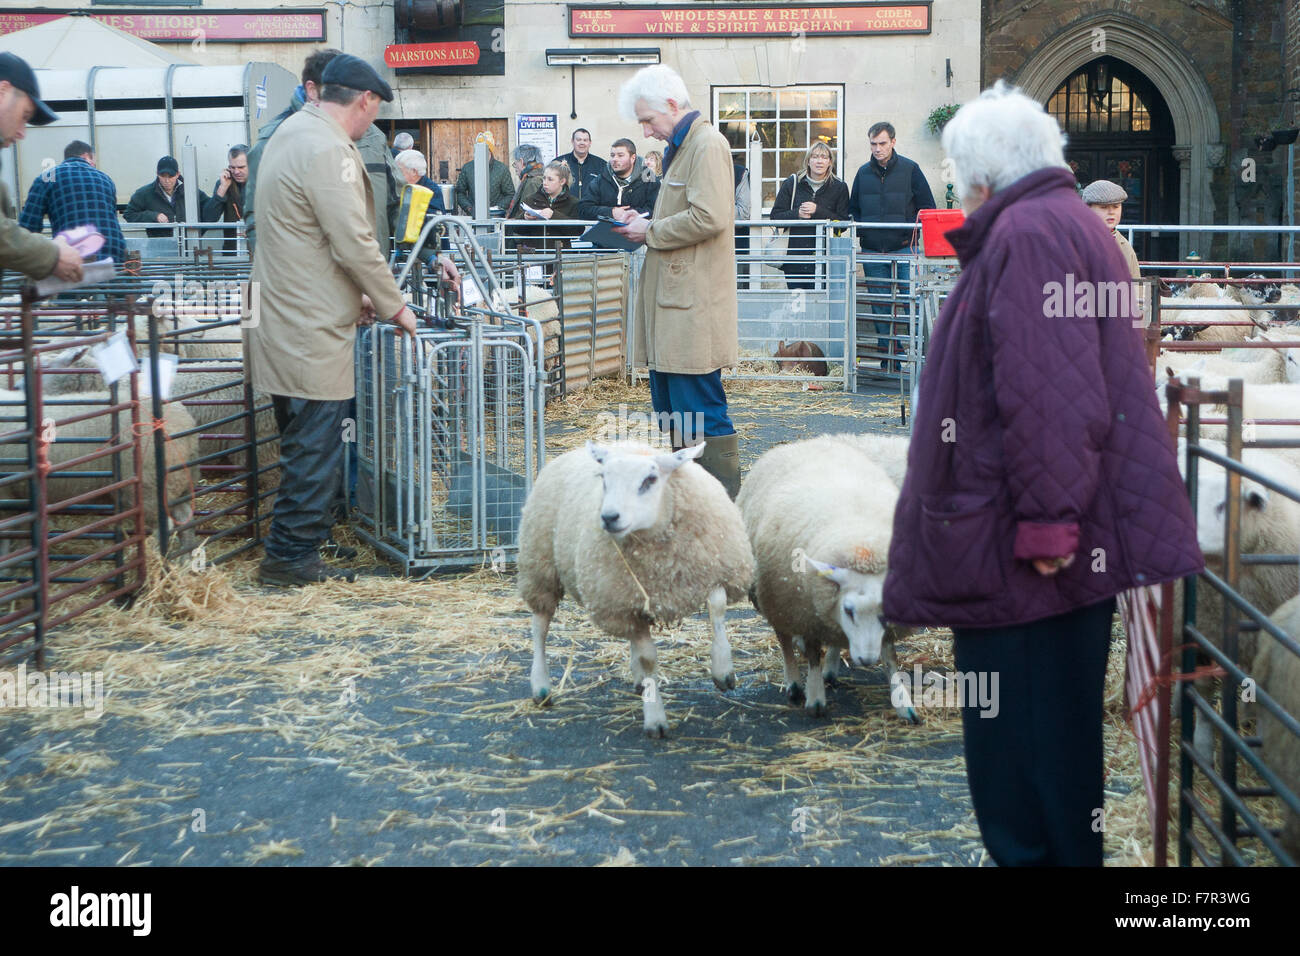 Uppingham, Rutland, UK., 2nd Dec 2015. Weighing the sheep and leading them to the pens at the Uppingham Fatstock show. Credit:  Jim Harrison/Alamy Live News Stock Photo